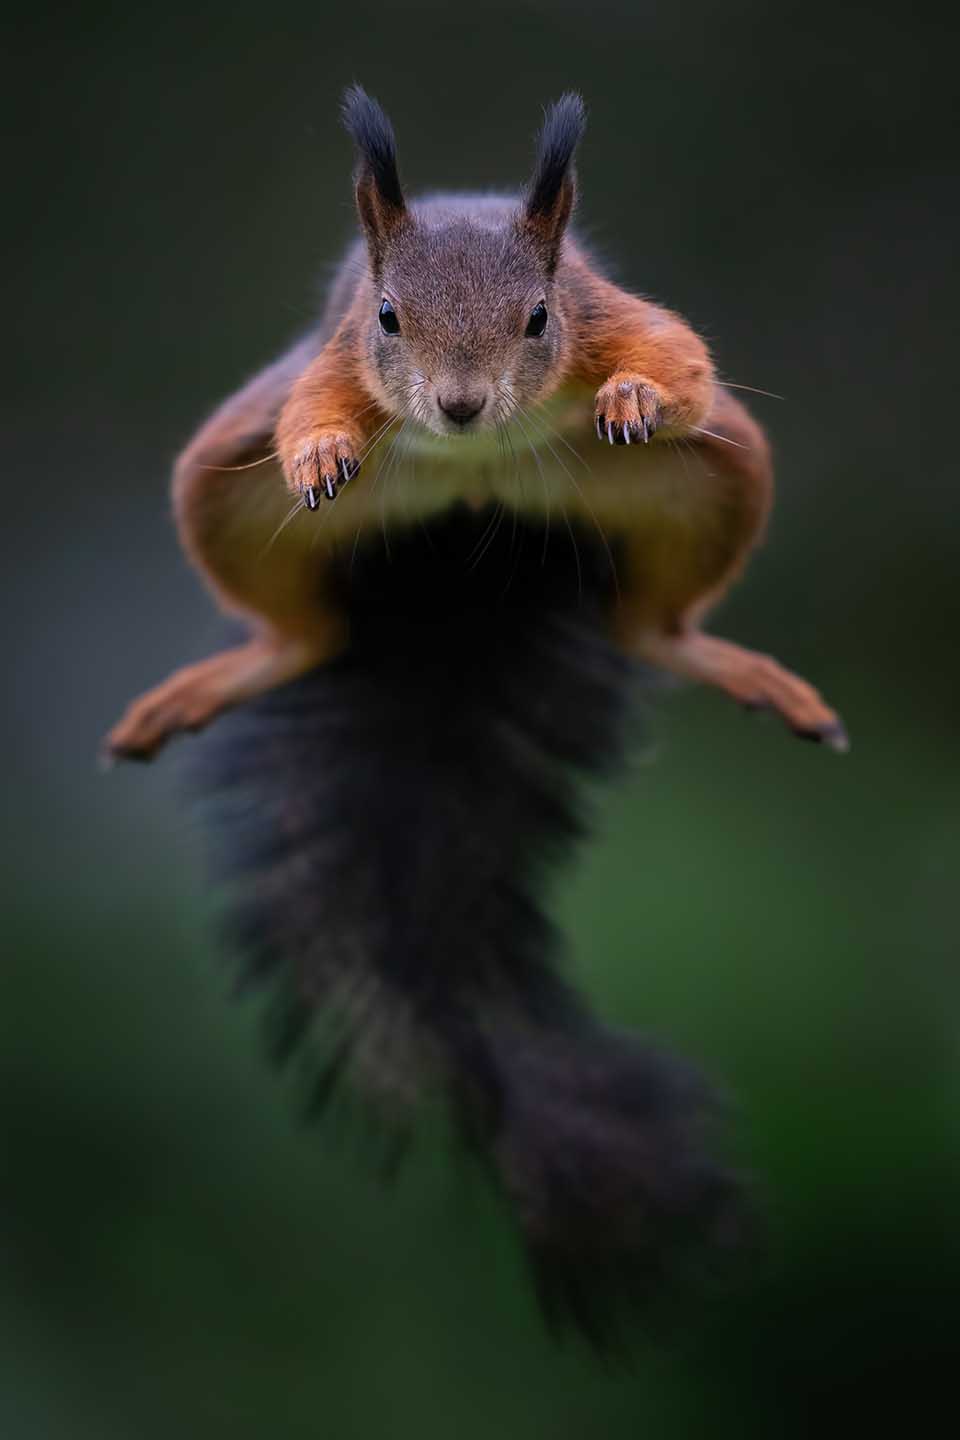 How to photograph squirrels